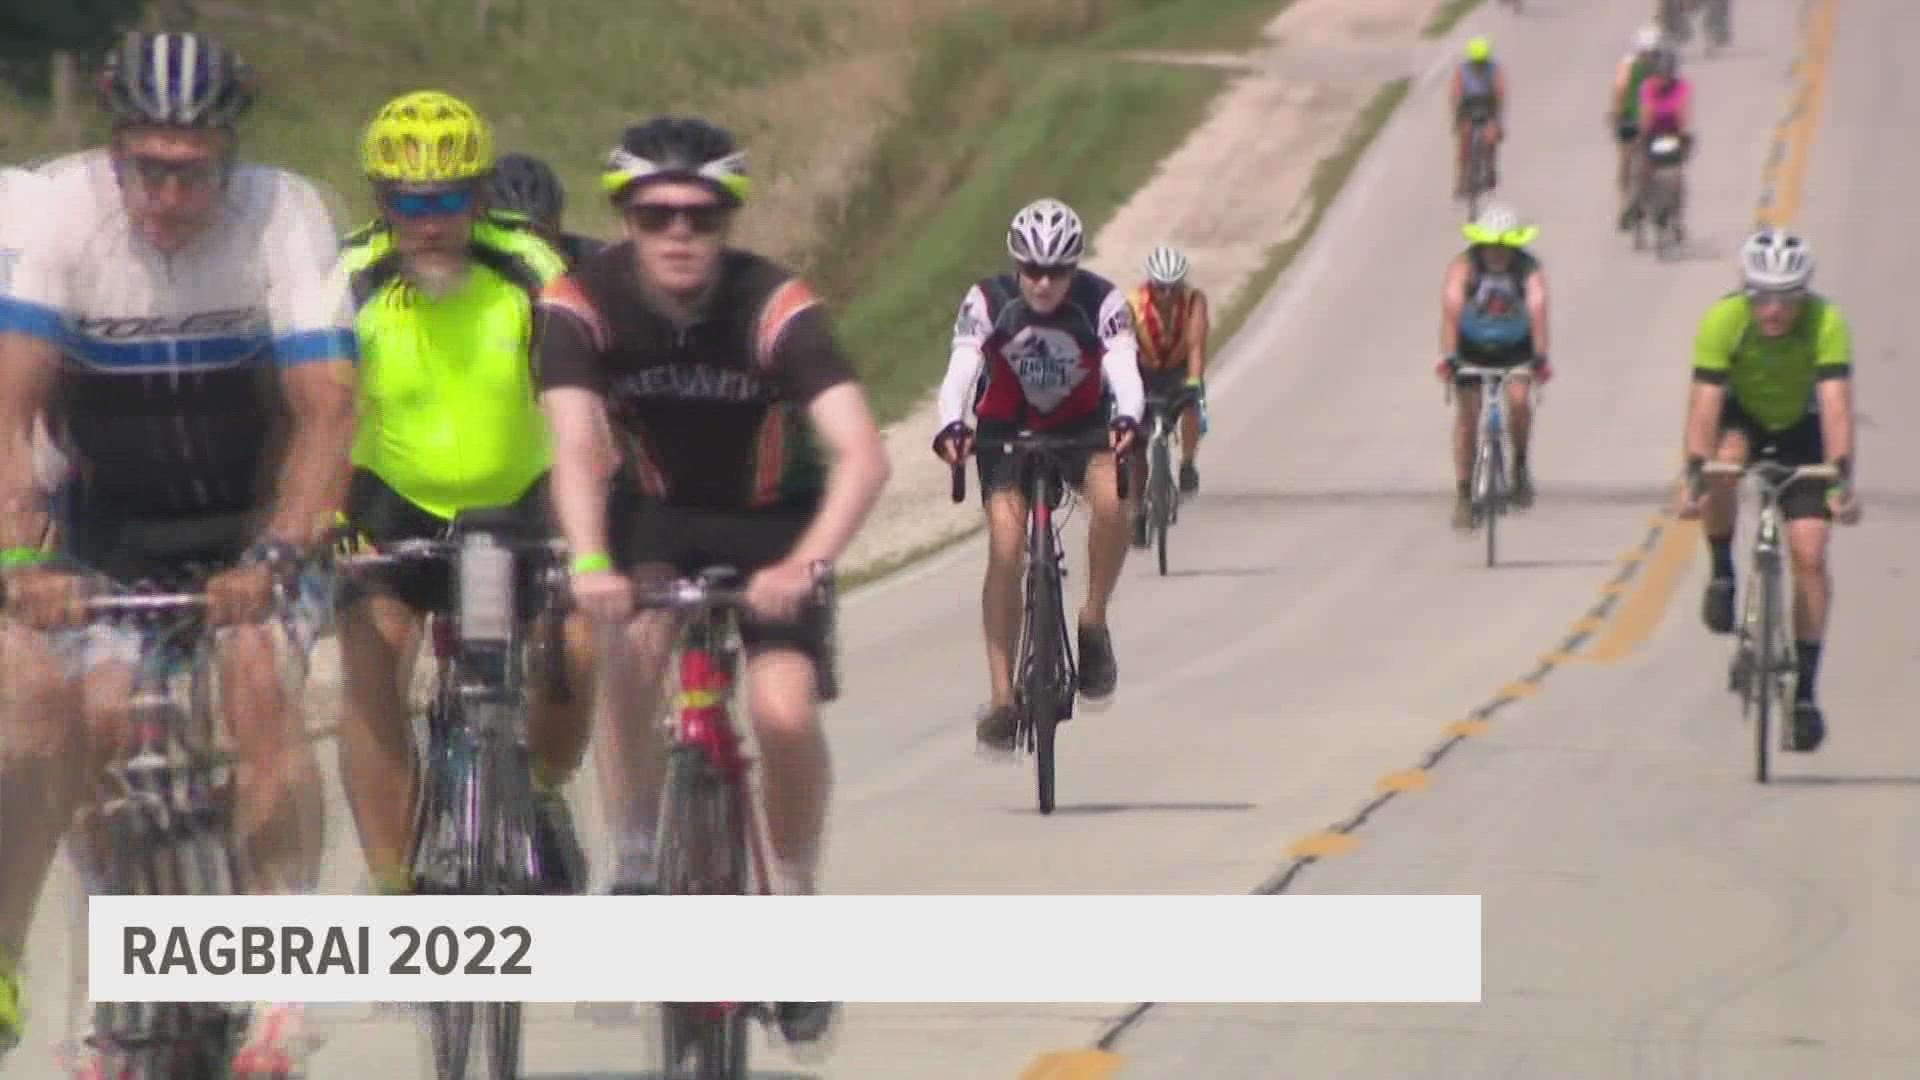 RAGBRAI will go through Pocahontas for the first time in 2022.